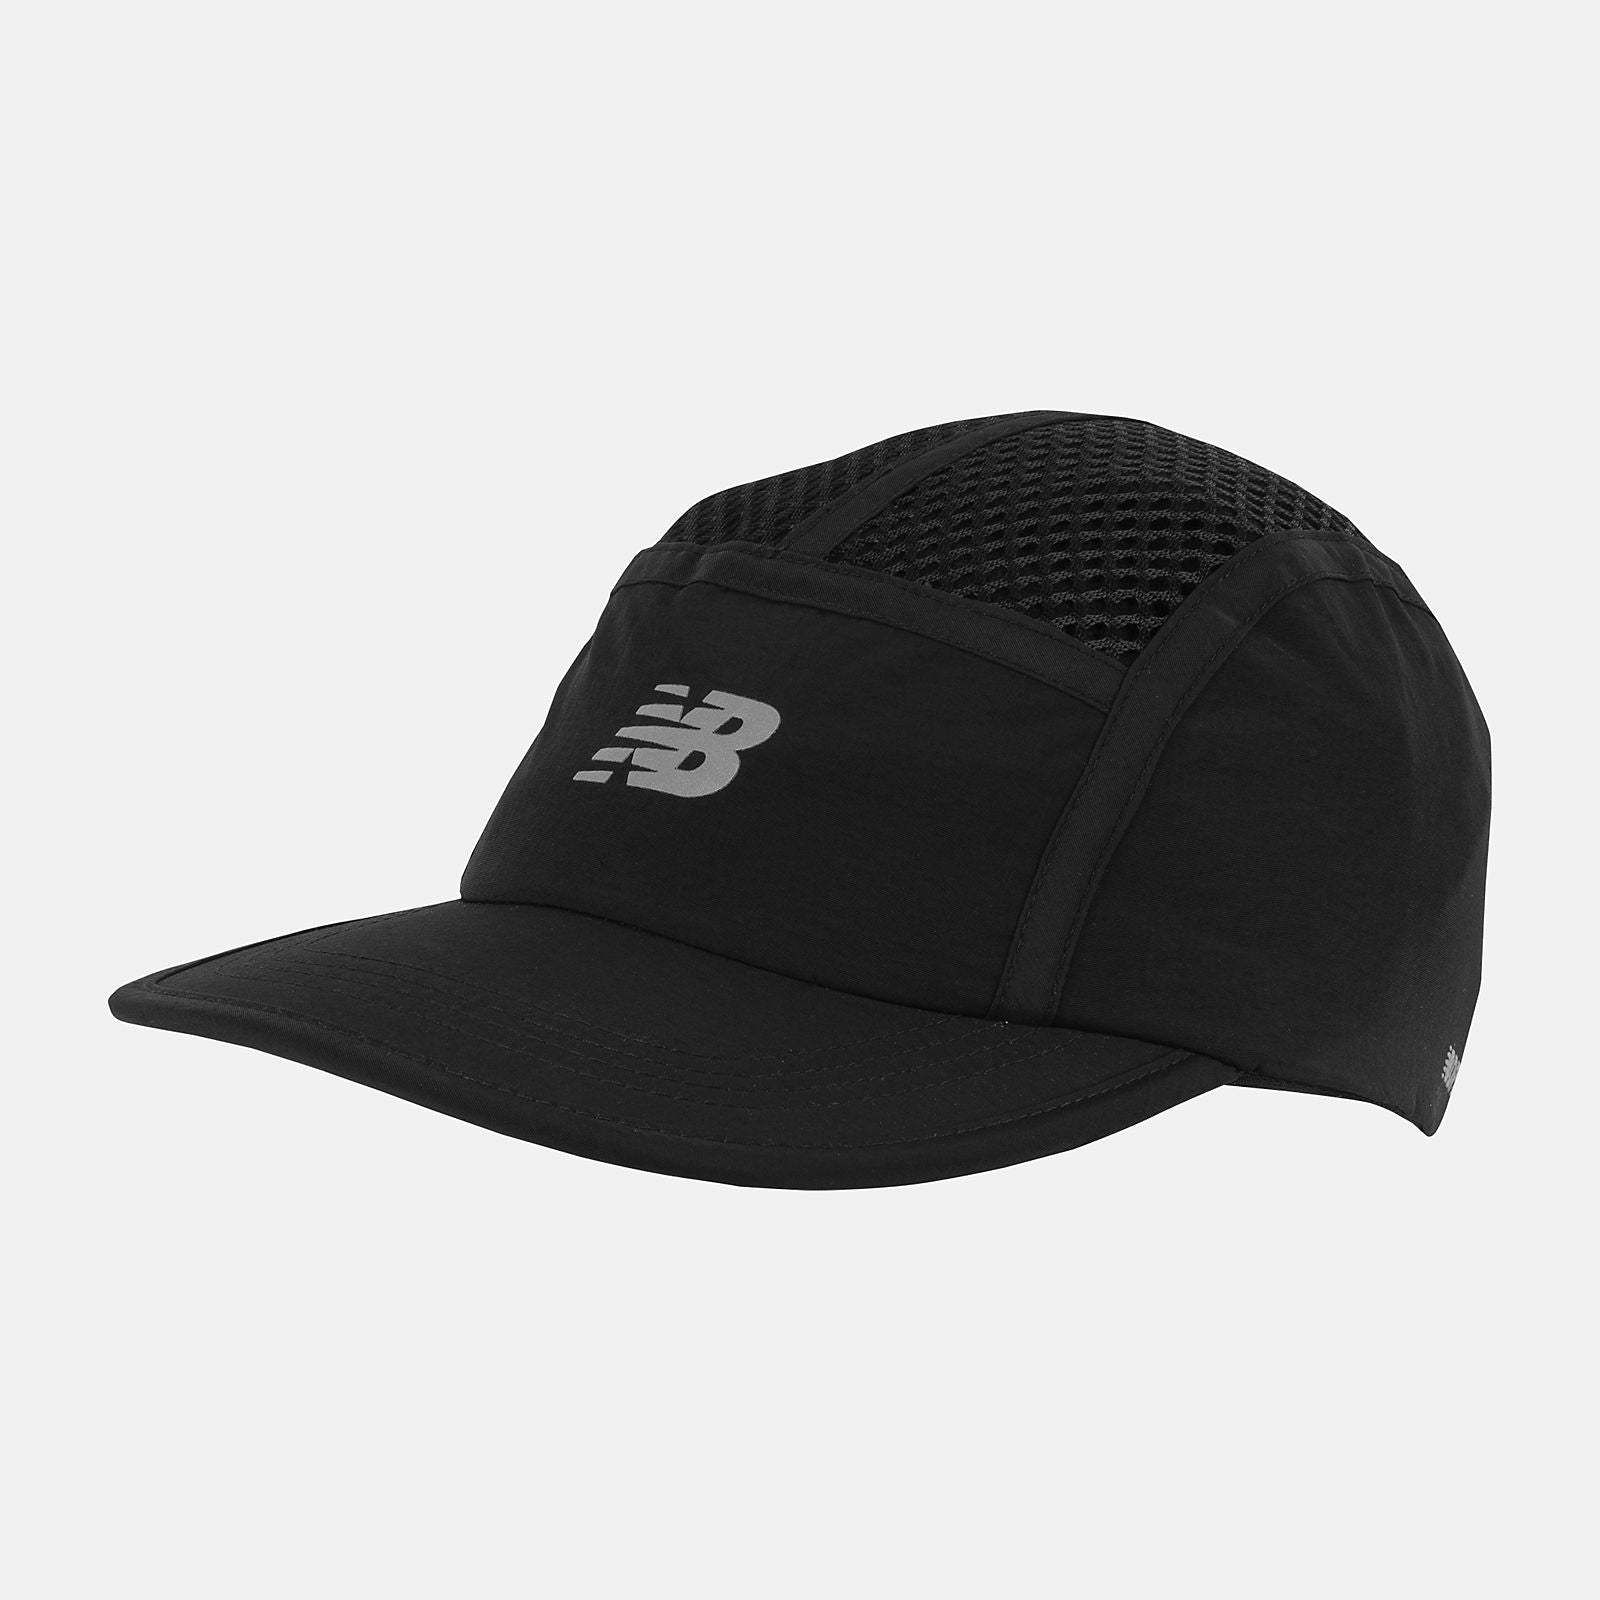 NEW BALANCE Running Stash Hat in Black LAH21001 O/S BLACK FROM EIGHTYWINGOLD - OFFICIAL BRAND PARTNER